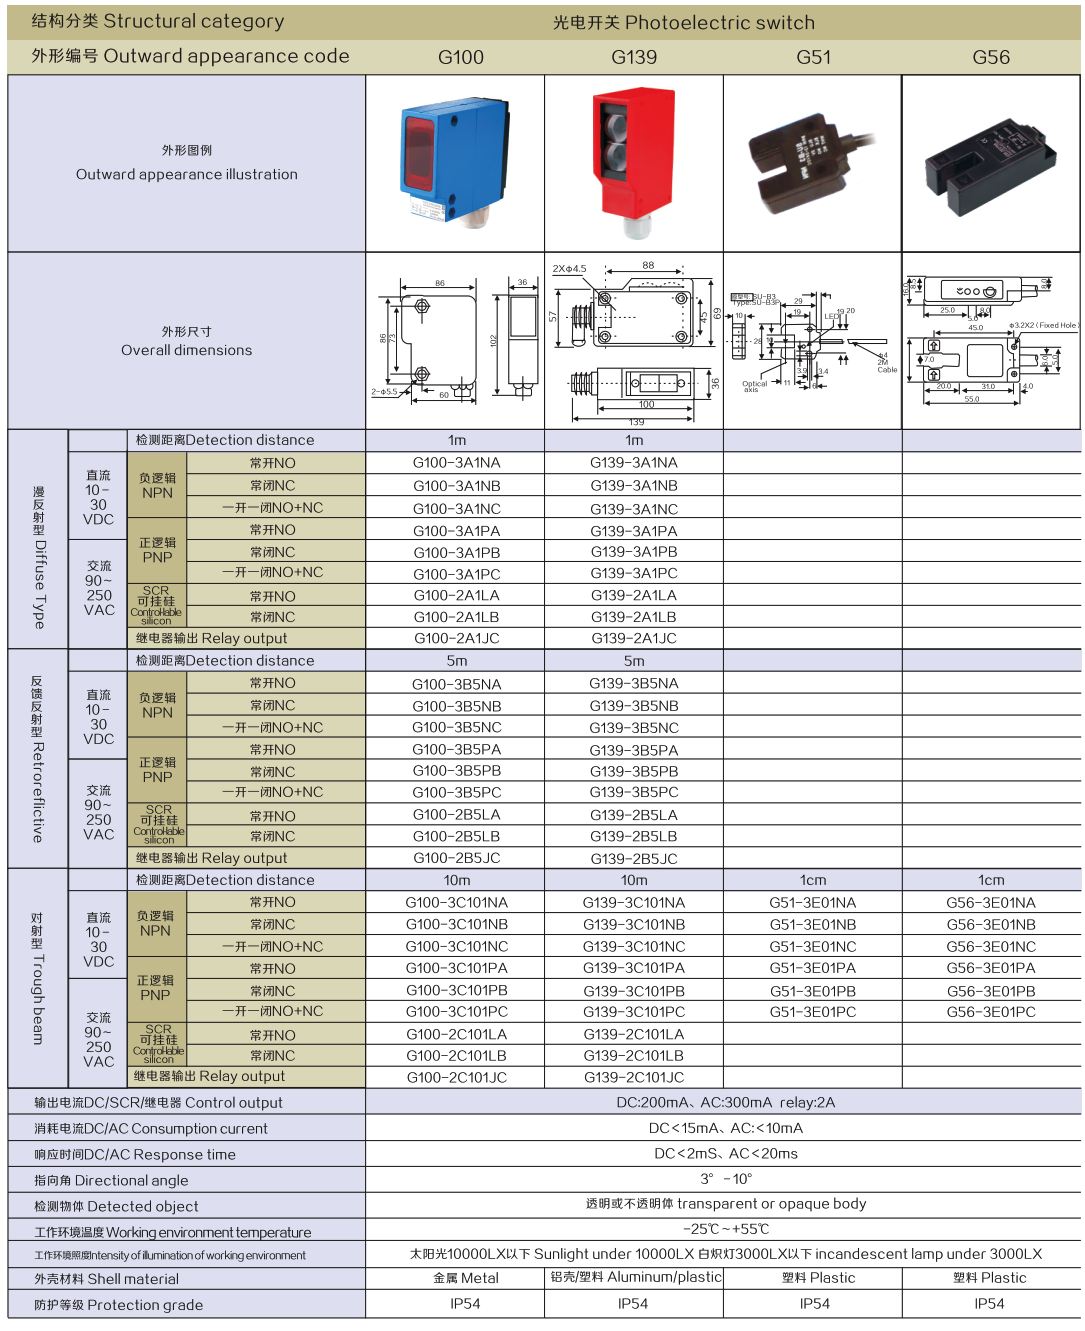 Structural category,Photoelectric switch,Outward appearance code